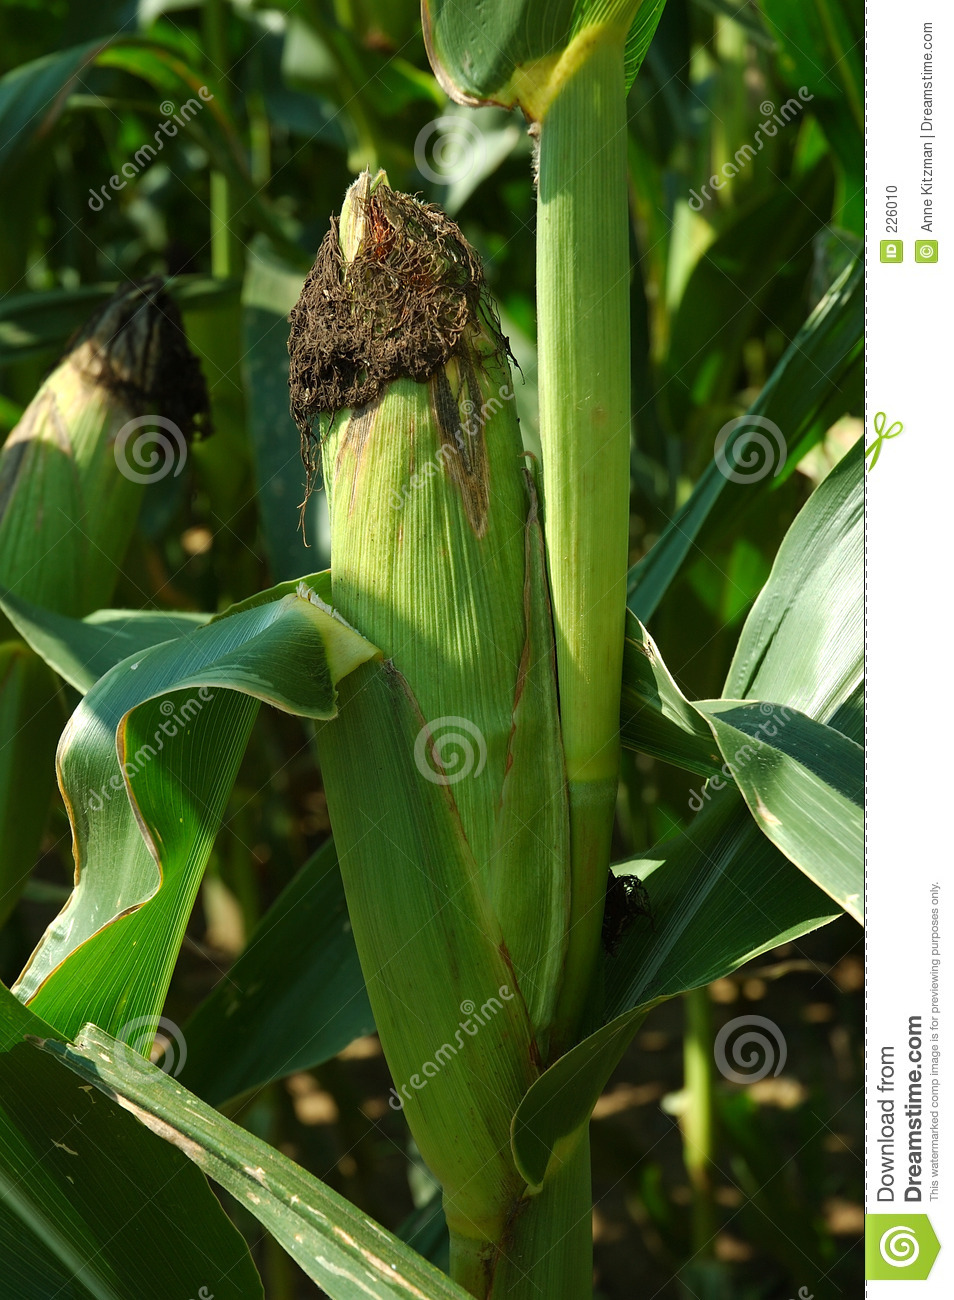 An Ear Of Corn Growing On The Stalk Ready To Be Harvested